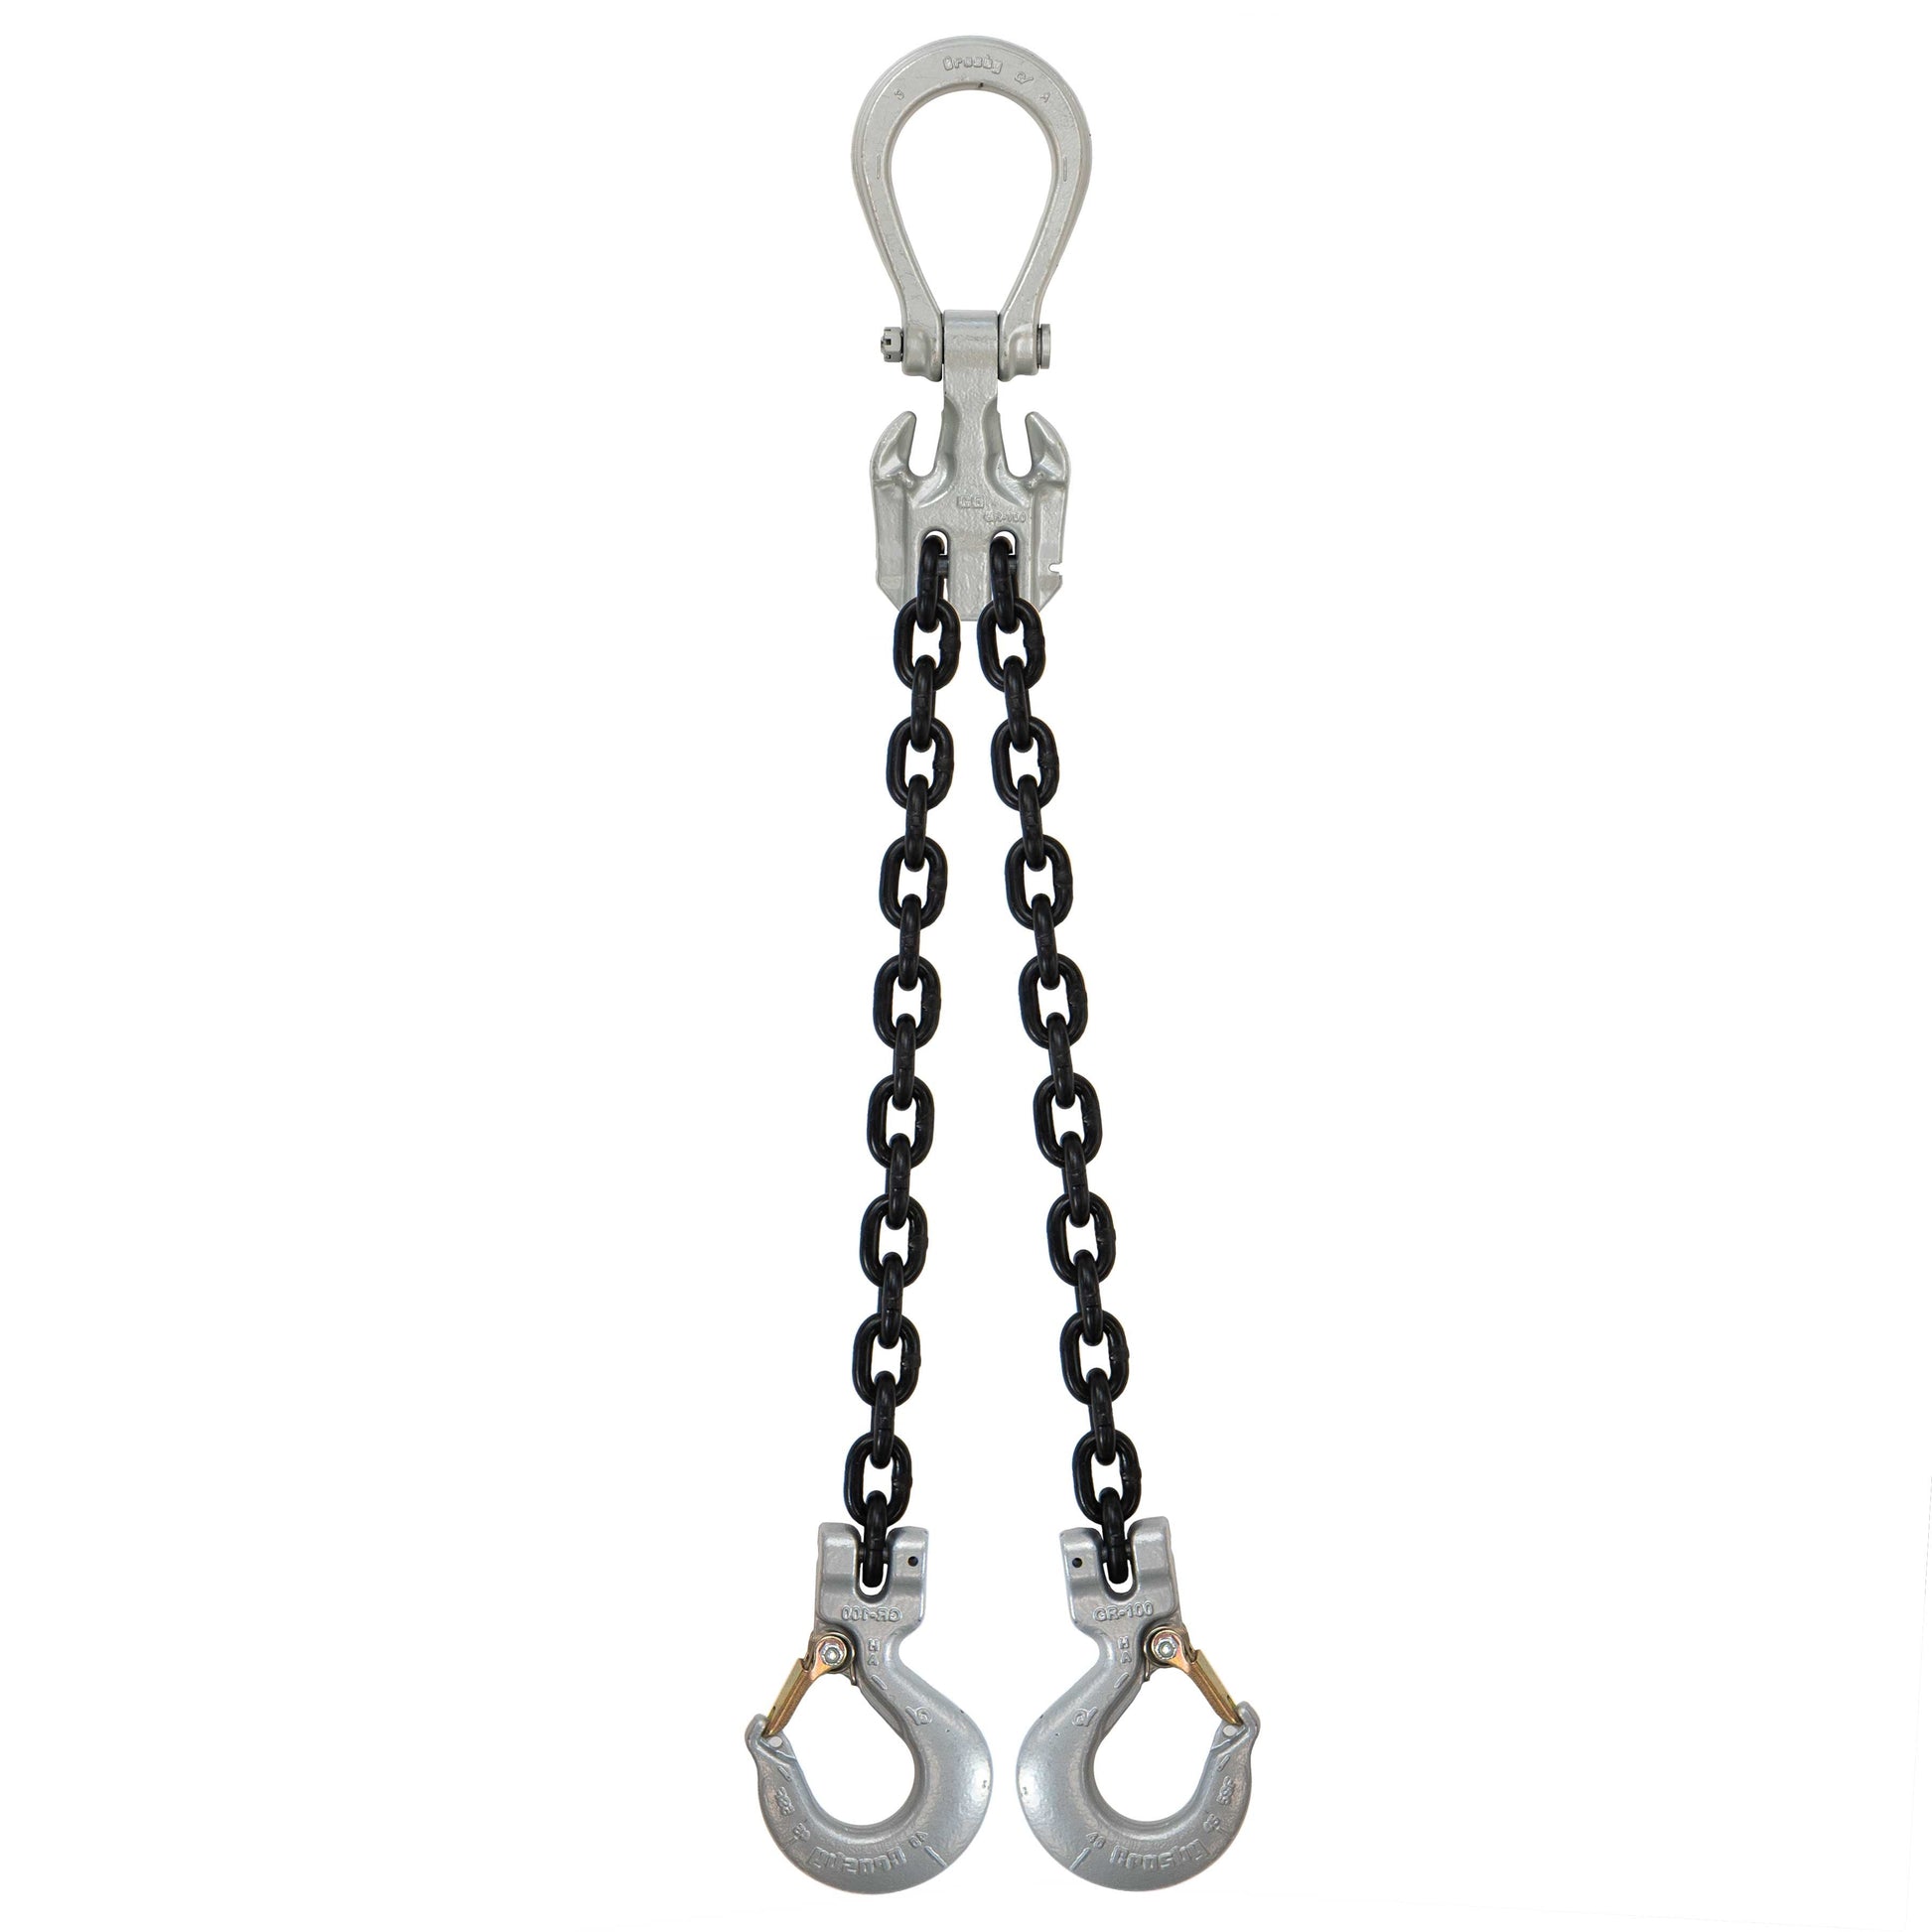 5/16 x 5' - Domestic Adjustable 2 Leg Chain Sling with Crosby Sling Hooks - Grade 100